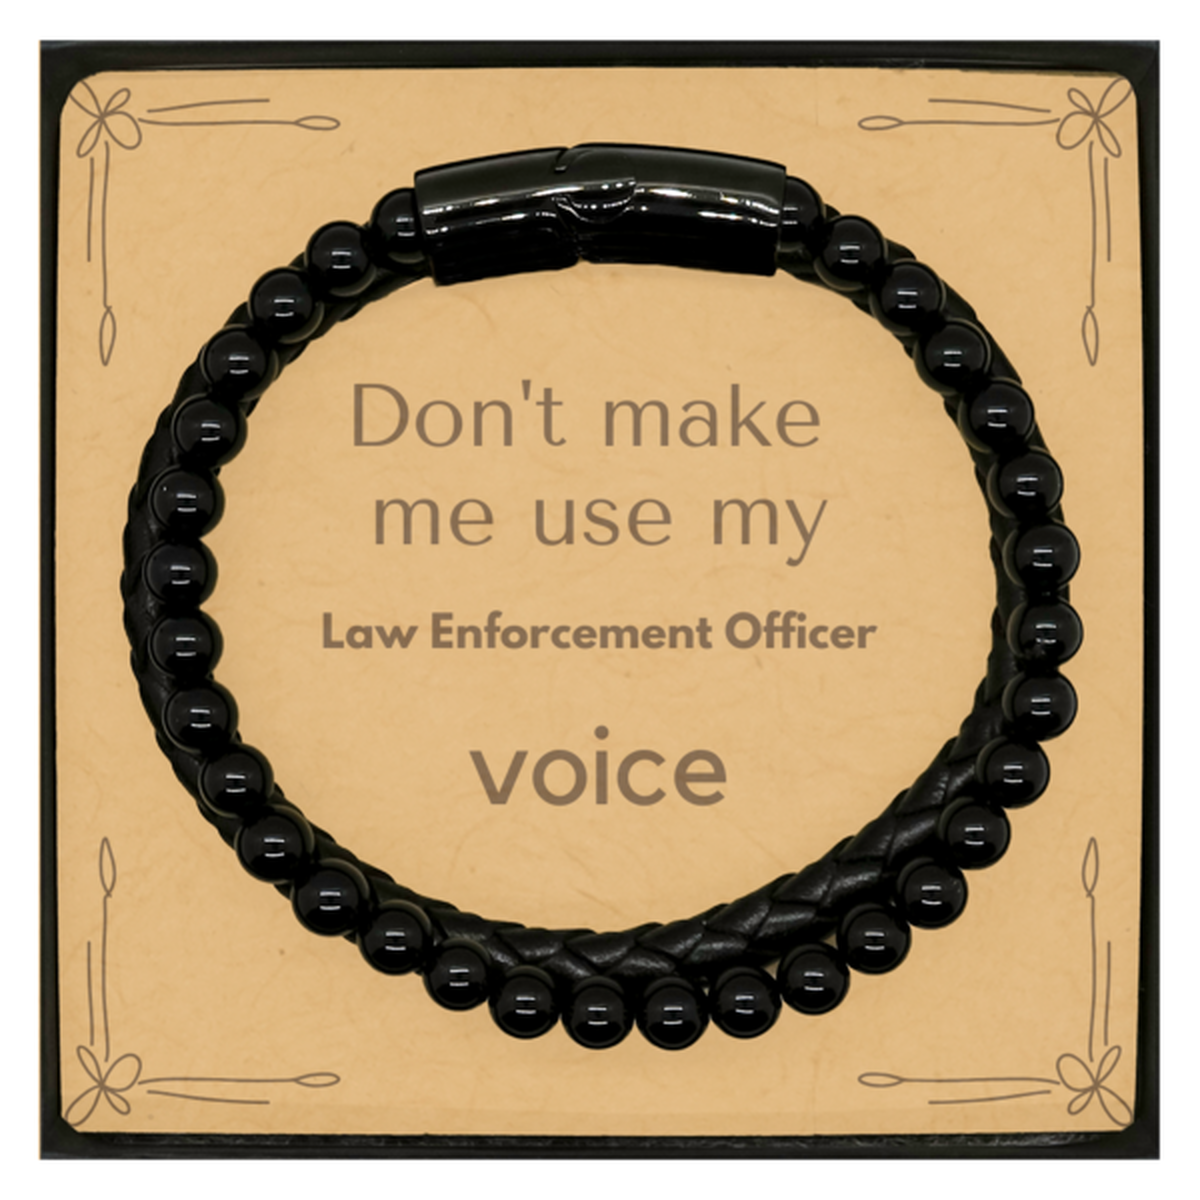 Don't make me use my Law Enforcement Officer voice, Sarcasm Law Enforcement Officer Card Gifts, Christmas Law Enforcement Officer Stone Leather Bracelets Birthday Unique Gifts For Law Enforcement Officer Coworkers, Men, Women, Colleague, Friends